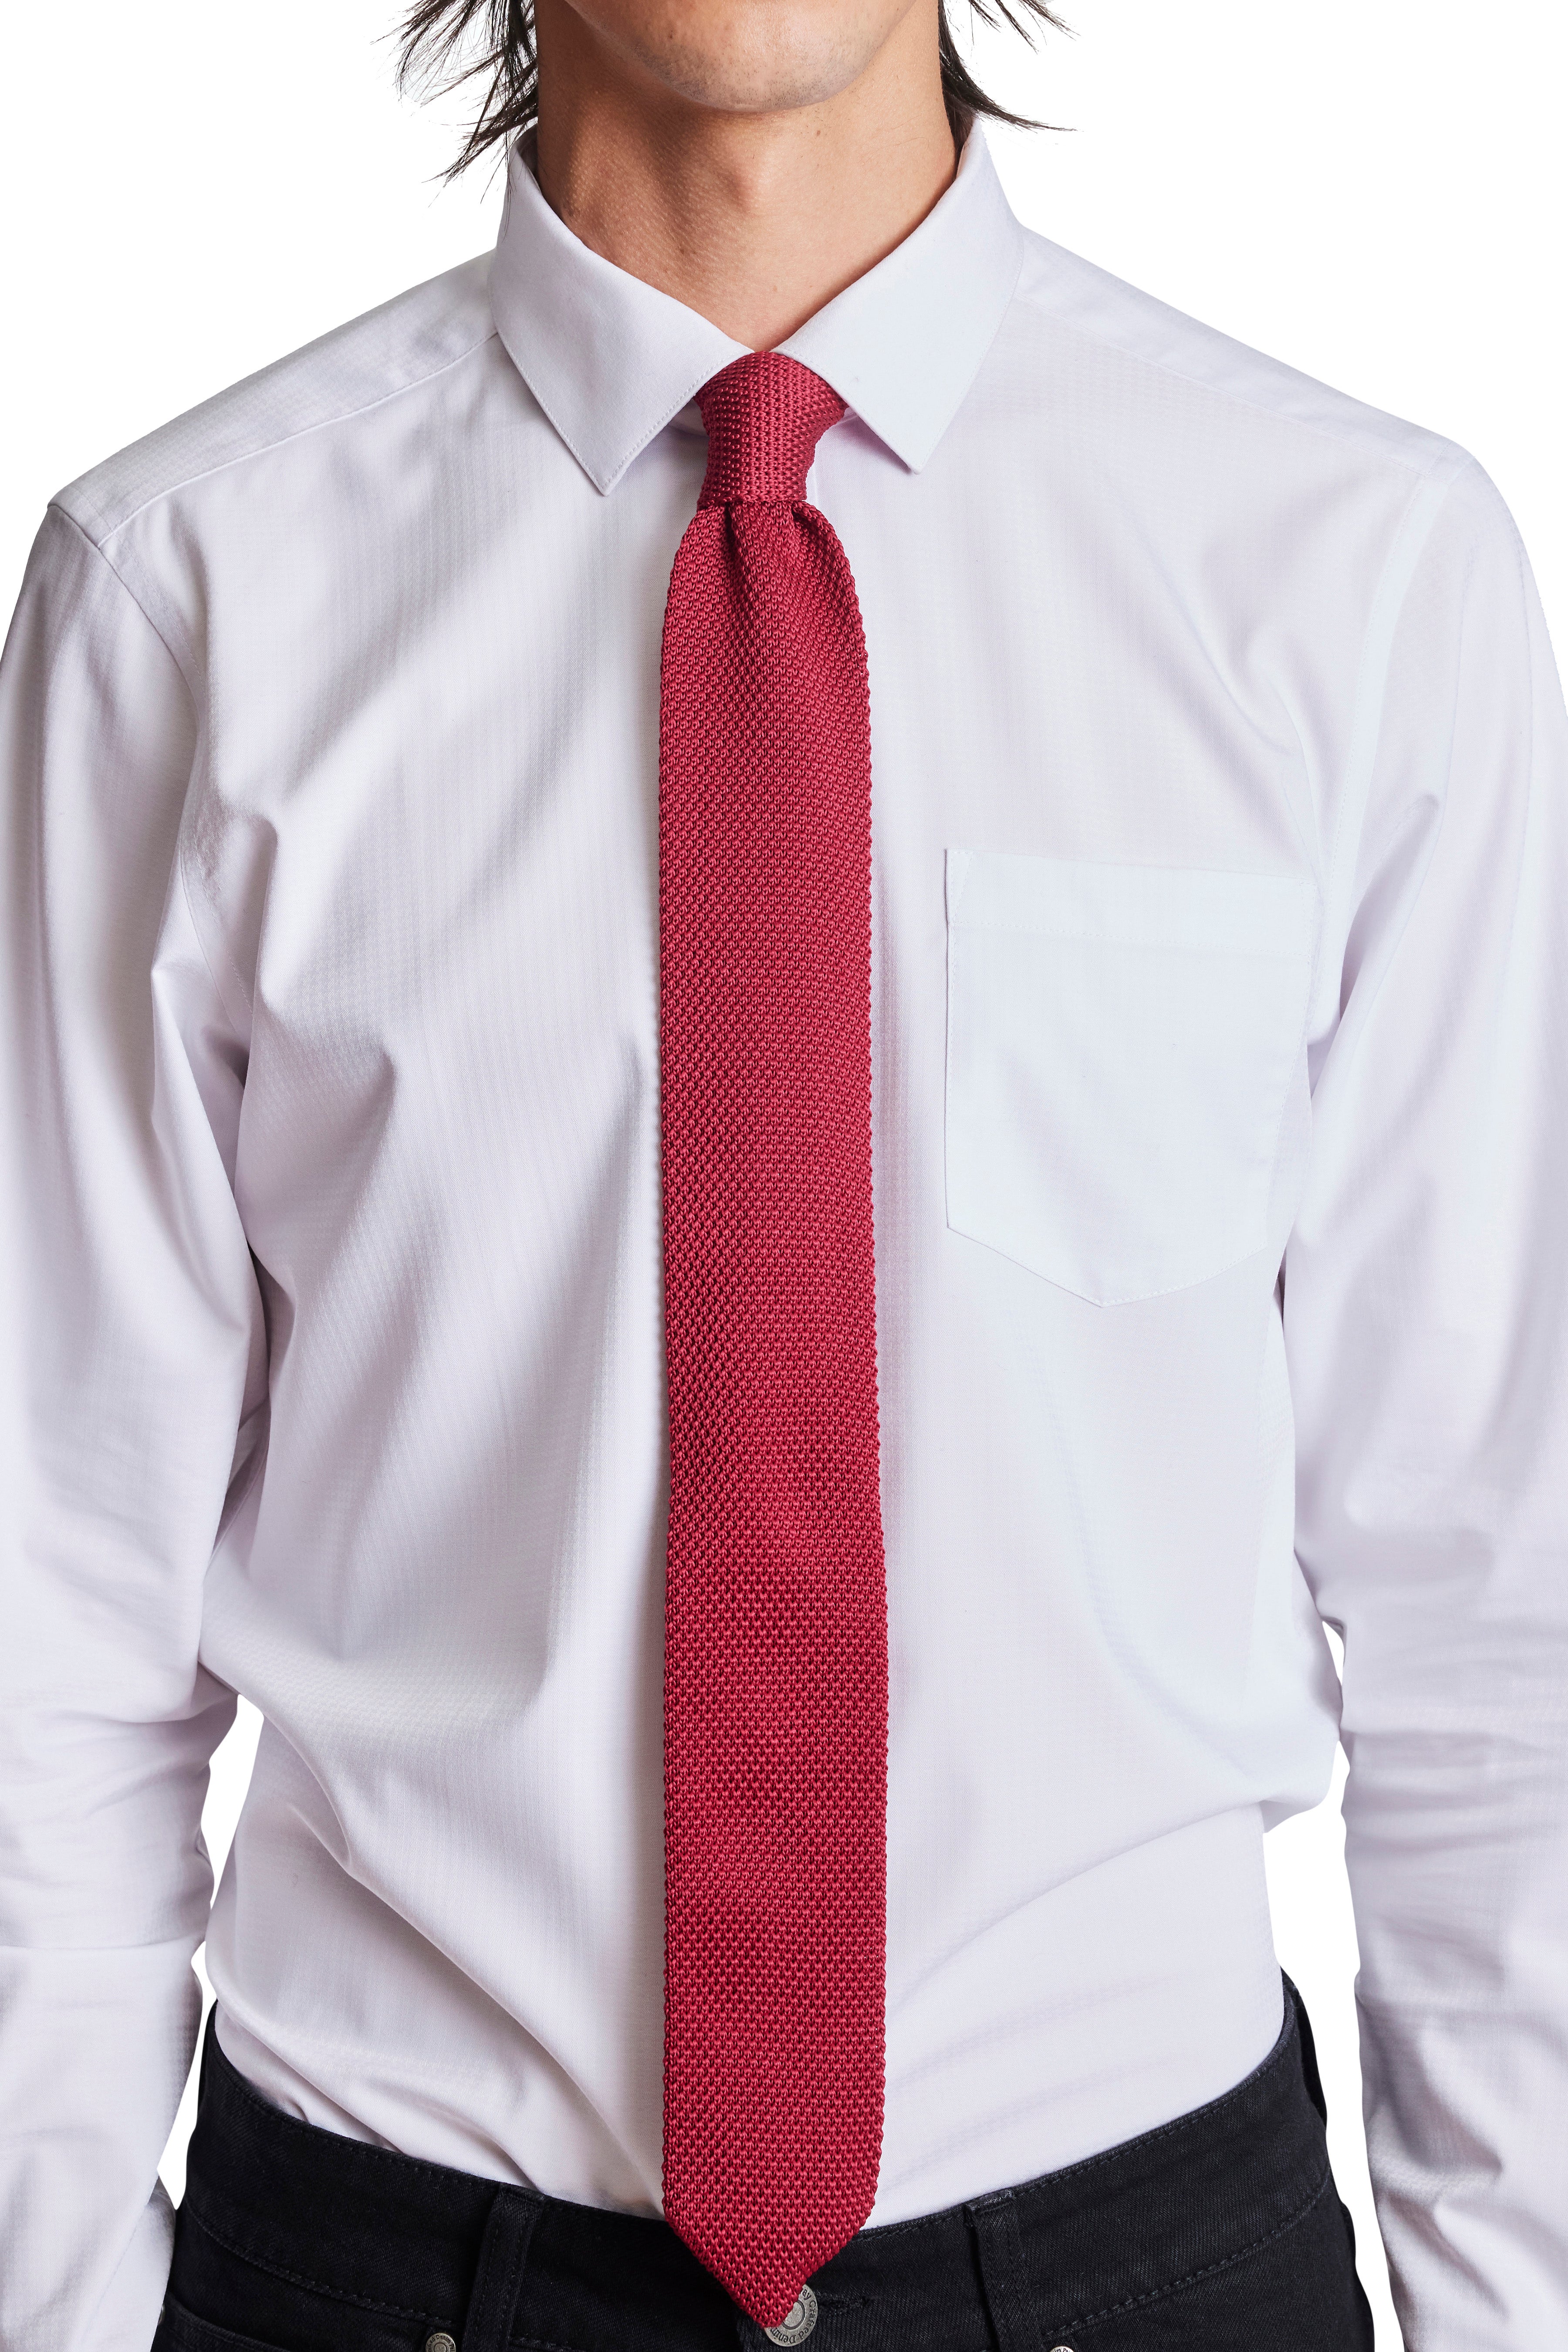 Stanley Knit Tie - Holiday Red